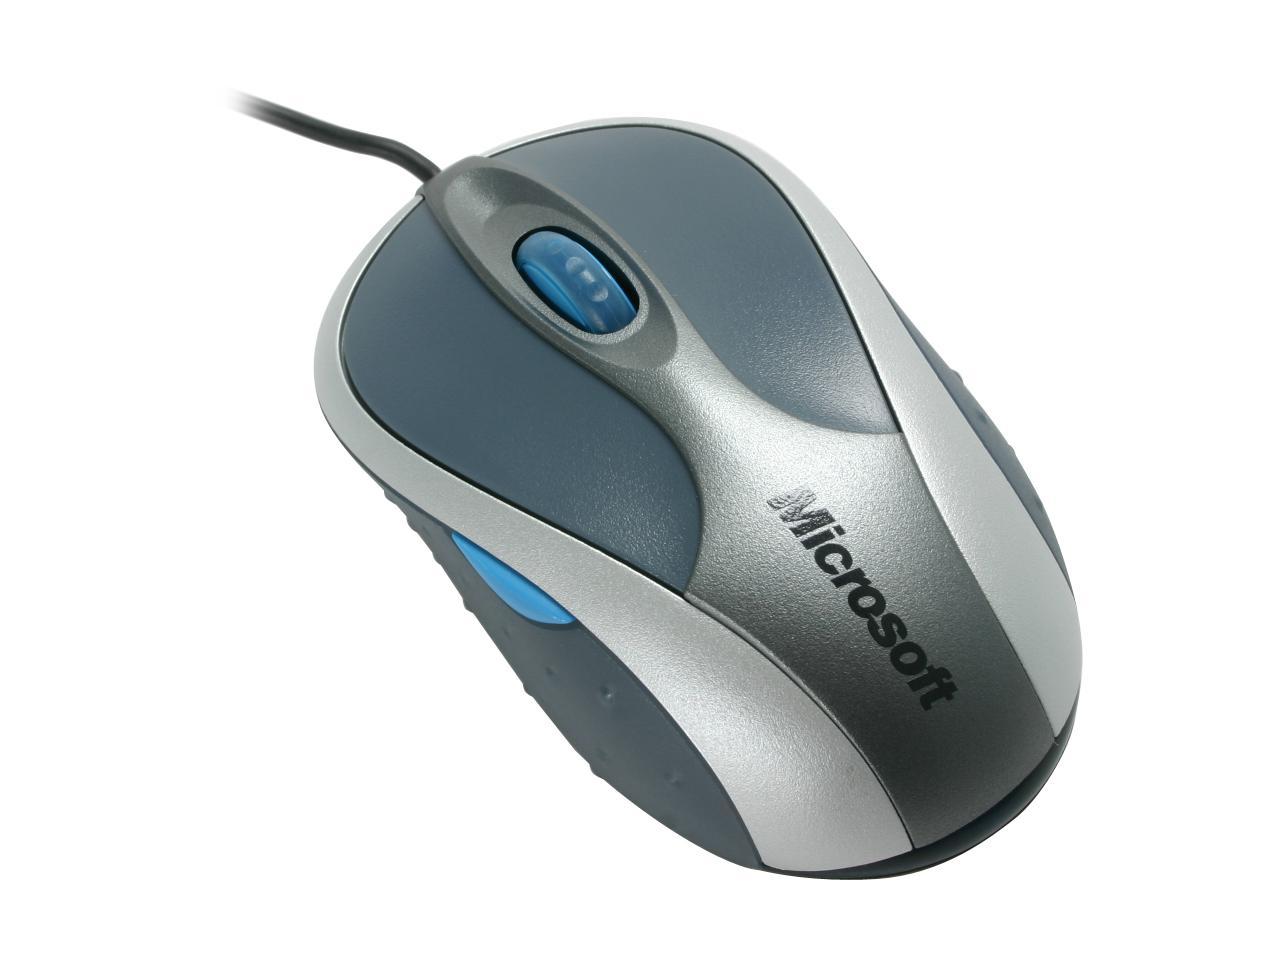 ms comfort optical mouse 3000